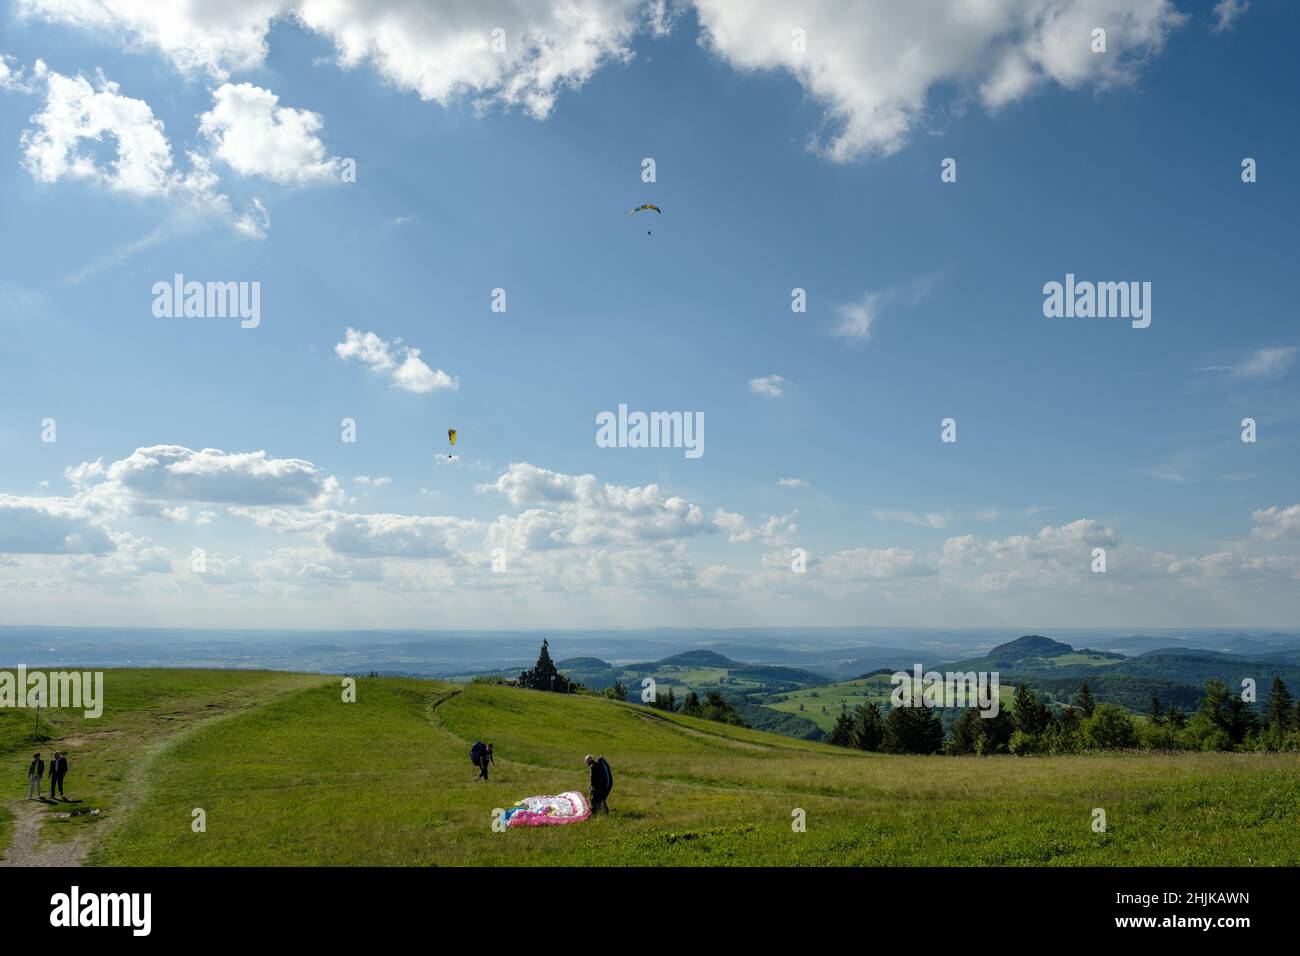 View from the hill Wasserkuppe in nature park Rhön Germany with paragliding on the ground and in the air. Stock Photo